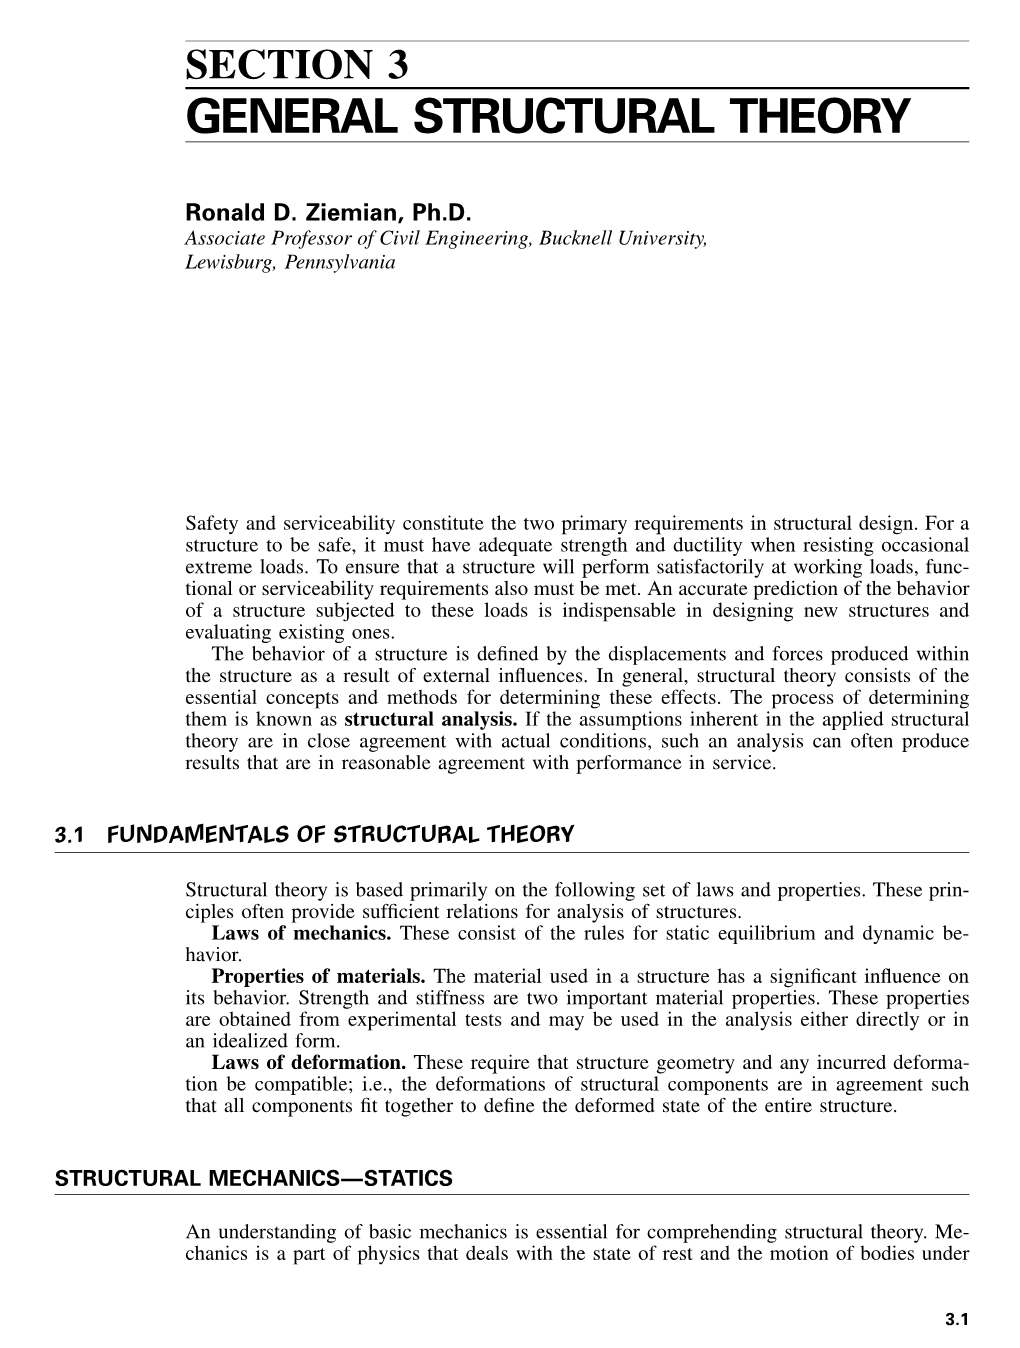 Section 3 General Structural Theory